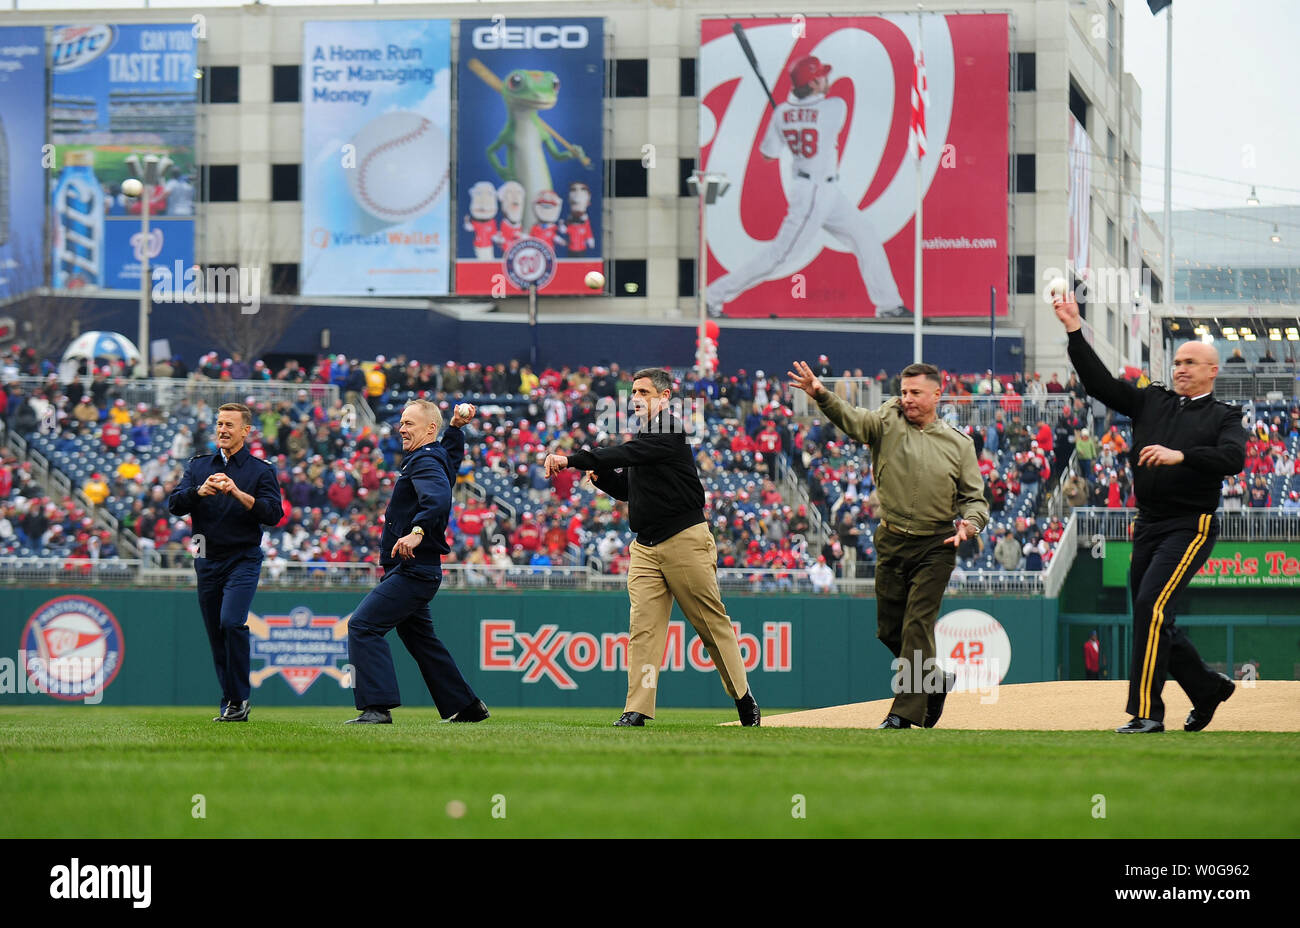 Major General Karl Horst, U.S. Army, Lieutenant General Terry Robling, U.S. Marine Coprs, Vice Admiral Michael Vital, U.S. Navy, Lieutenant General Richard Newton III, U.S. Air Force, and Rear Admiral Paul Zukunft, U.S. Cost Guard, throw out the ceremonial first pitches prior to the Washington Nationals' opening day game against the Atlanta Braves at Nationals Park in Washington, March 31, 2011.  UPI/Kevin Dietsch Stock Photo